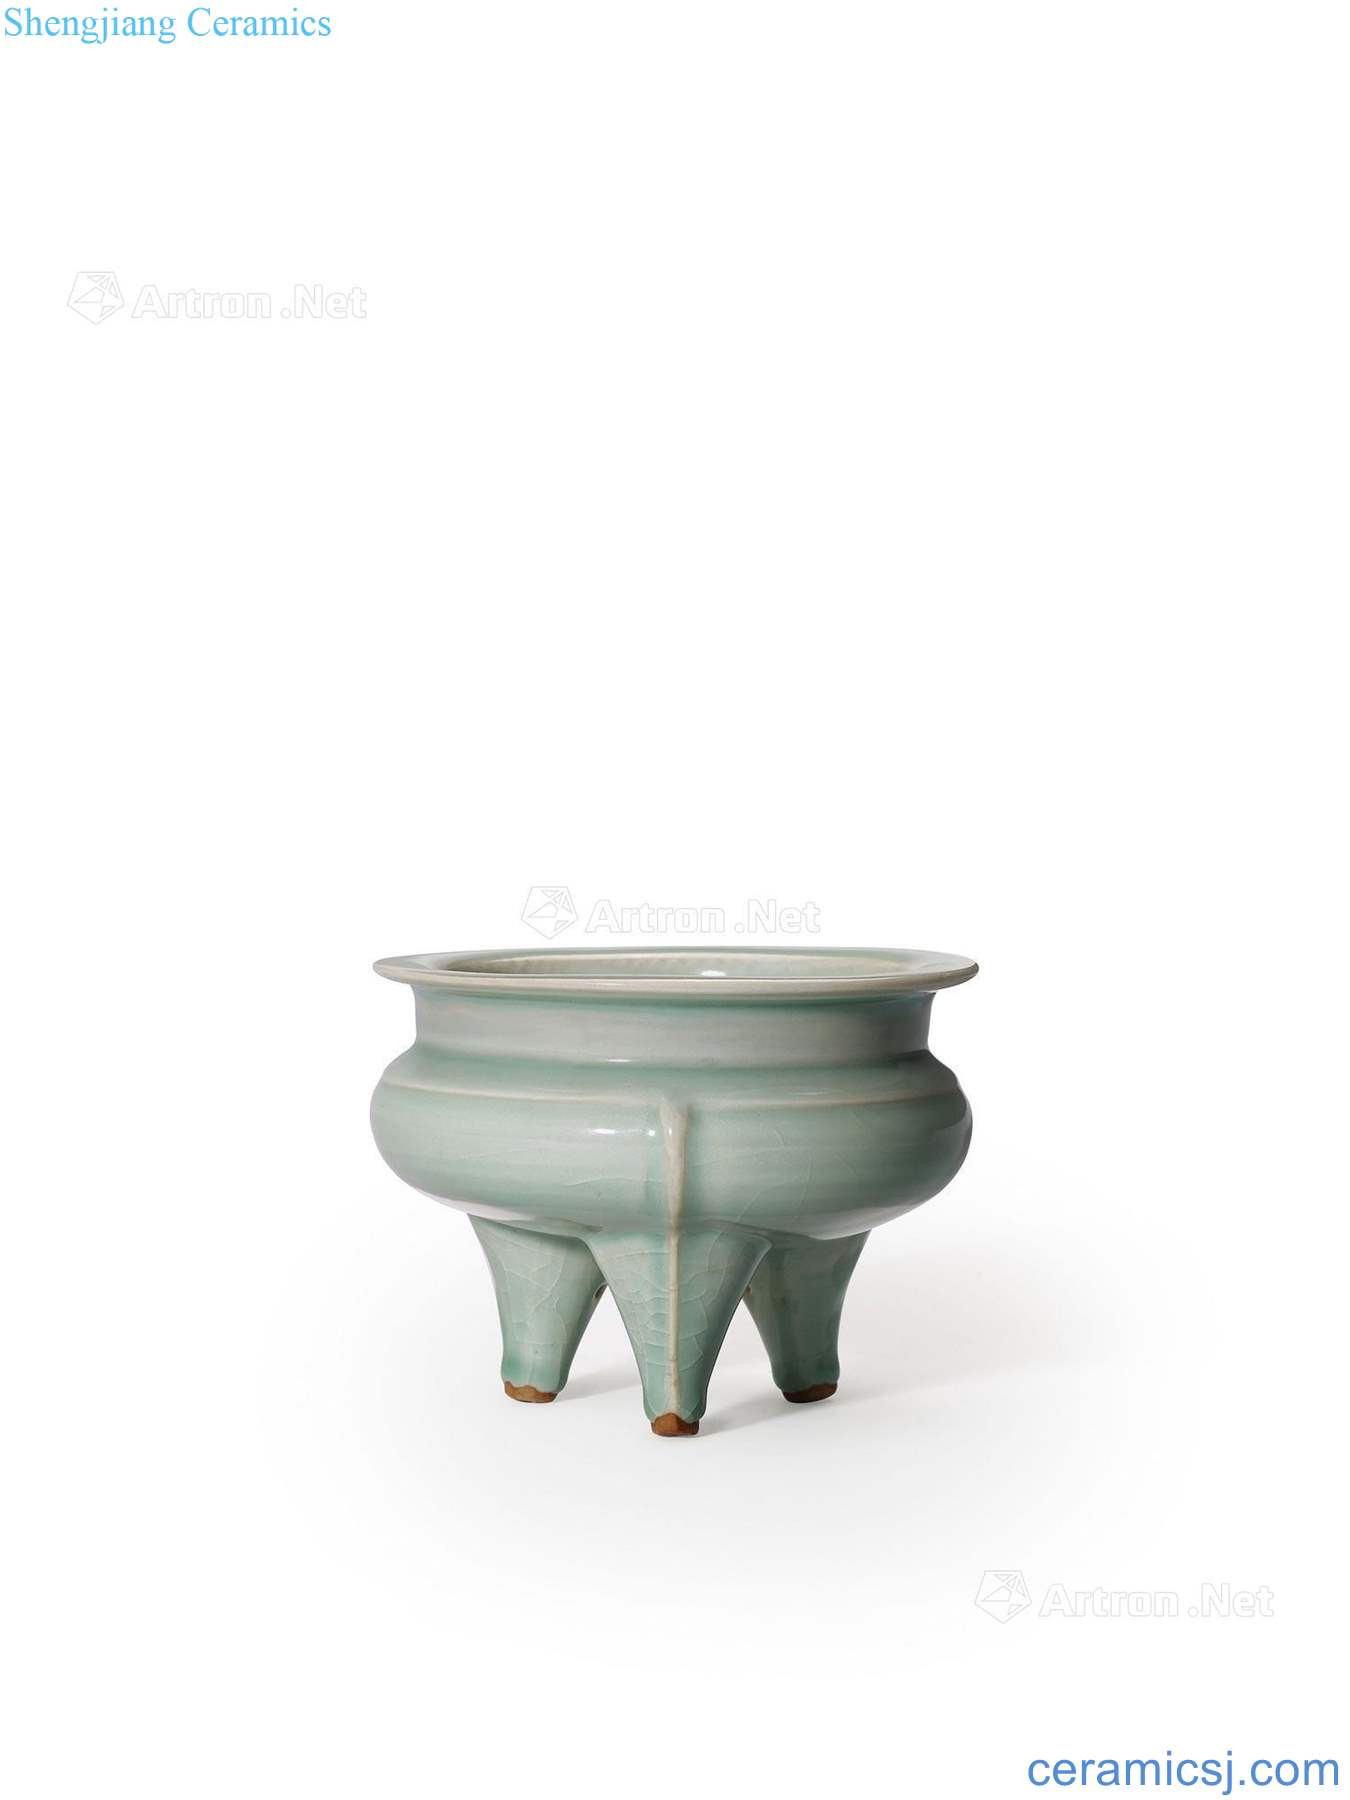 The southern song dynasty Longquan celadon green glaze by incense burner